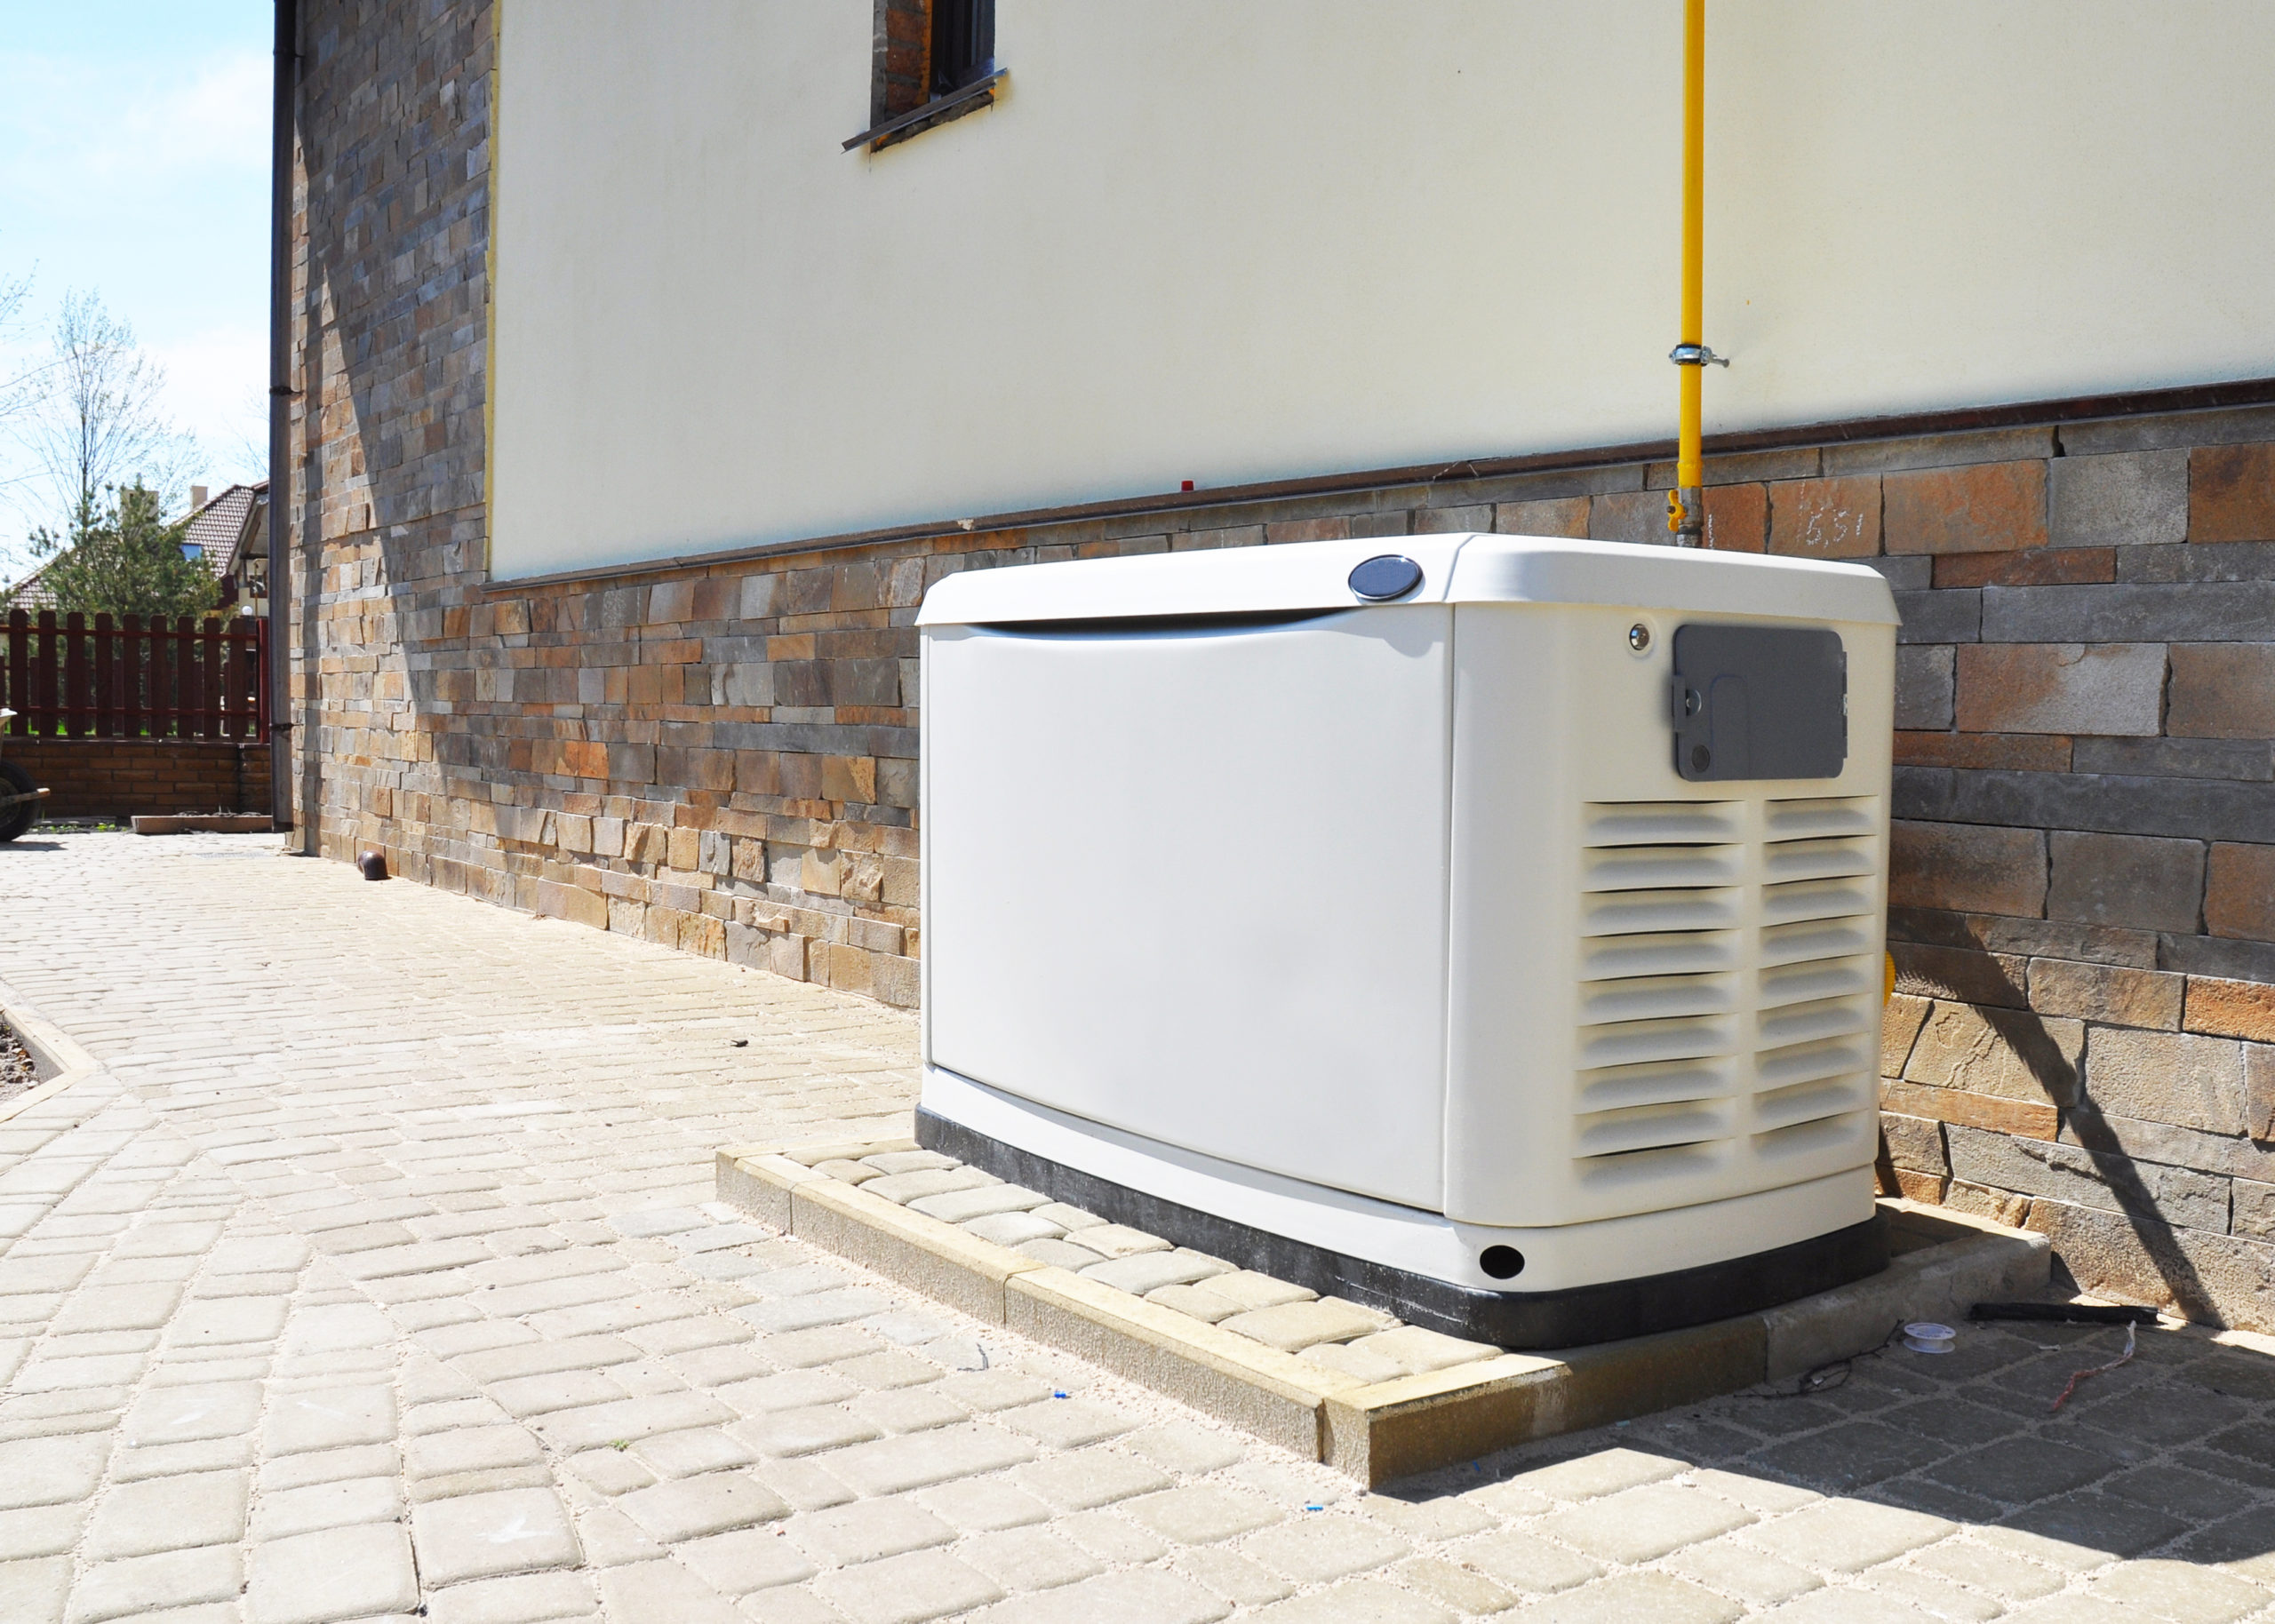 Why You Should Consider Having an Emergency Generator for Your Home or Business